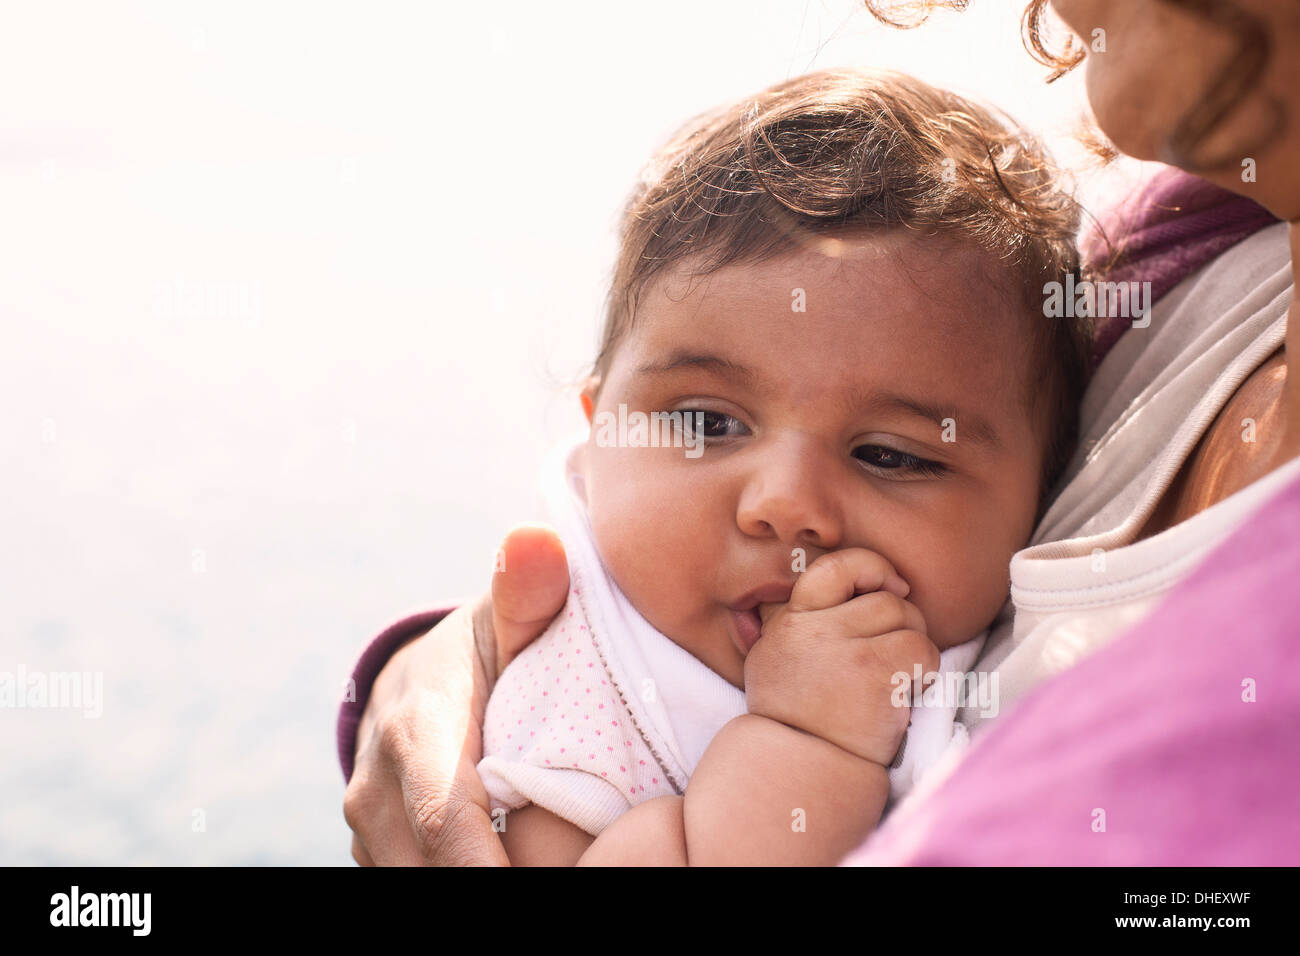 Mother cuddling baby girl Banque D'Images